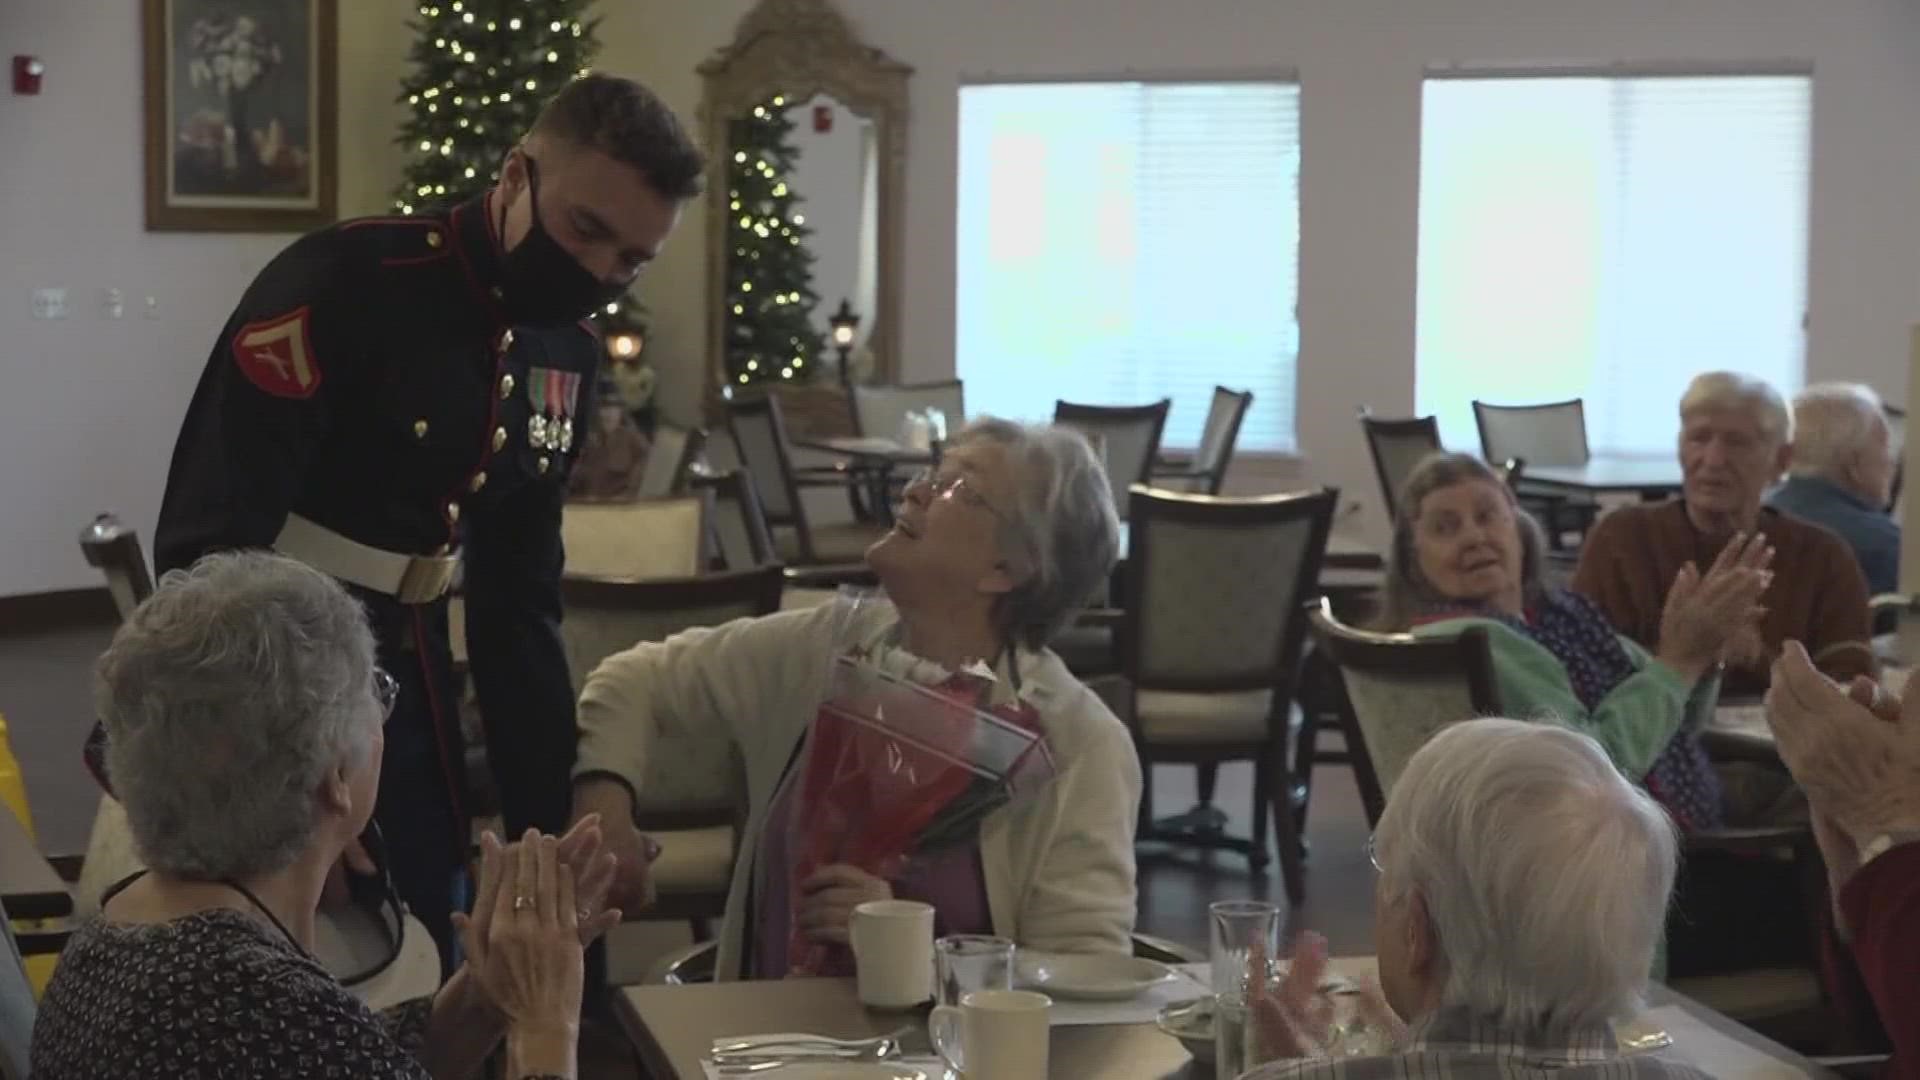 NEWS CENTER Maine's Hannah Yechivi shows us a holiday reunion that one family will never forget.